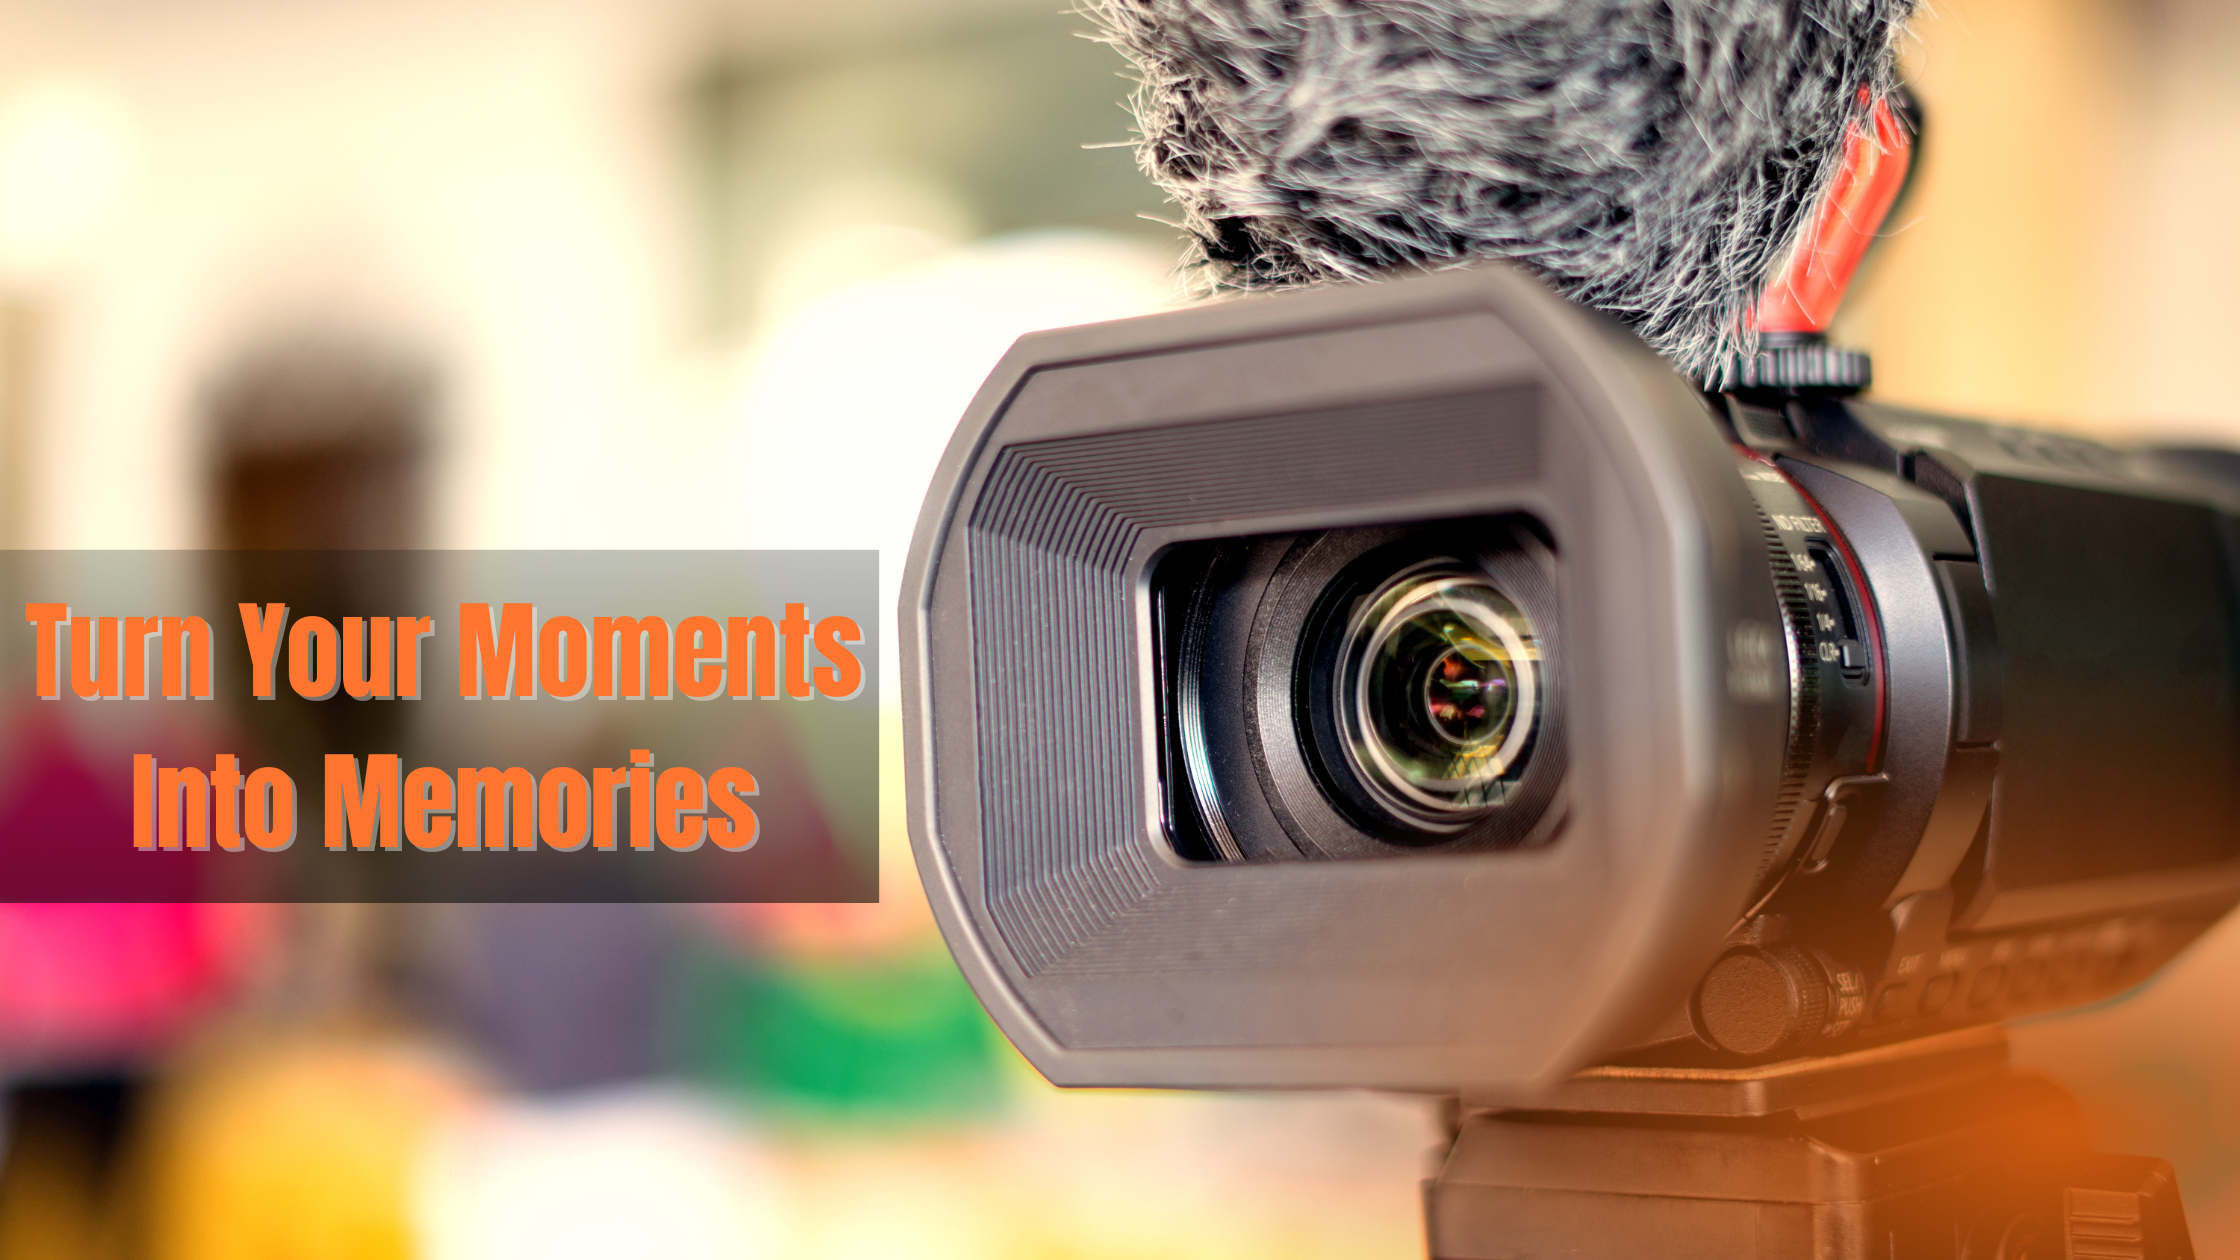 How Professional Video Editing Can Turn Your Moments into Memories